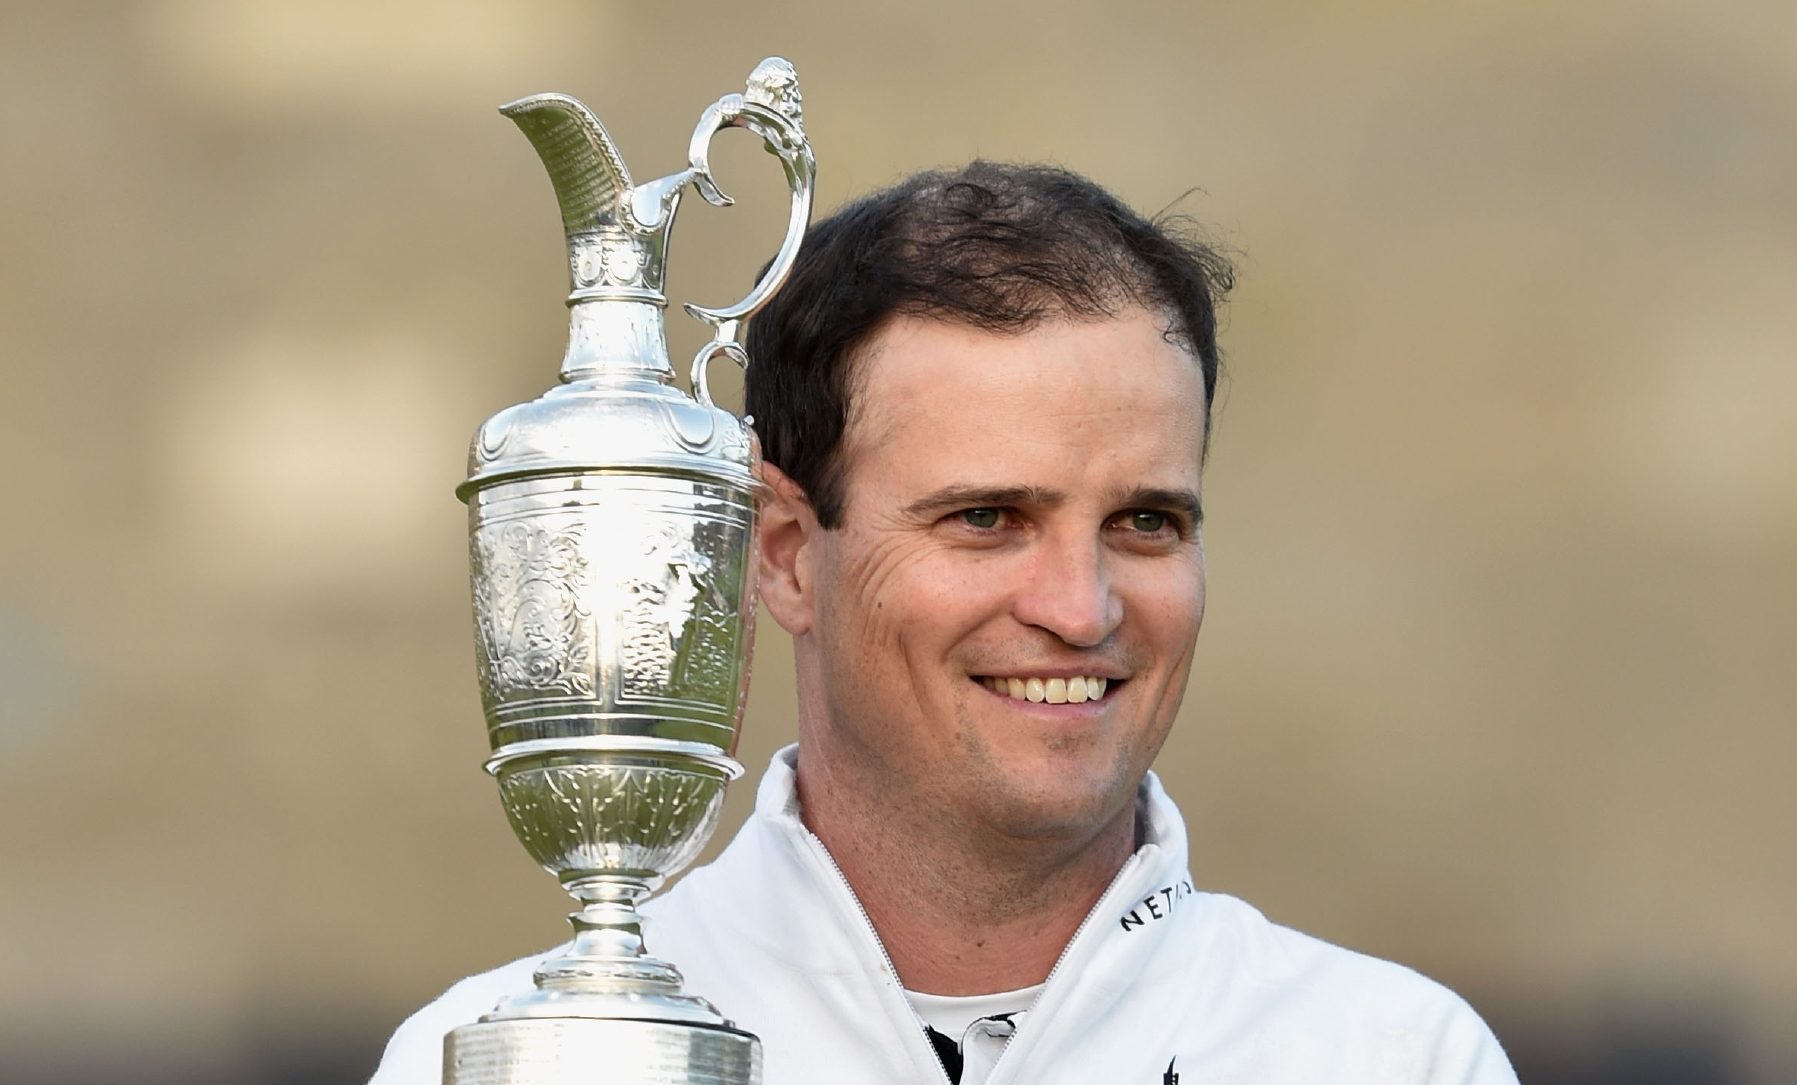 US golfer Zach Johnson holds the Claret Jug after winning the 144th Open Championship at The Old Course last year.